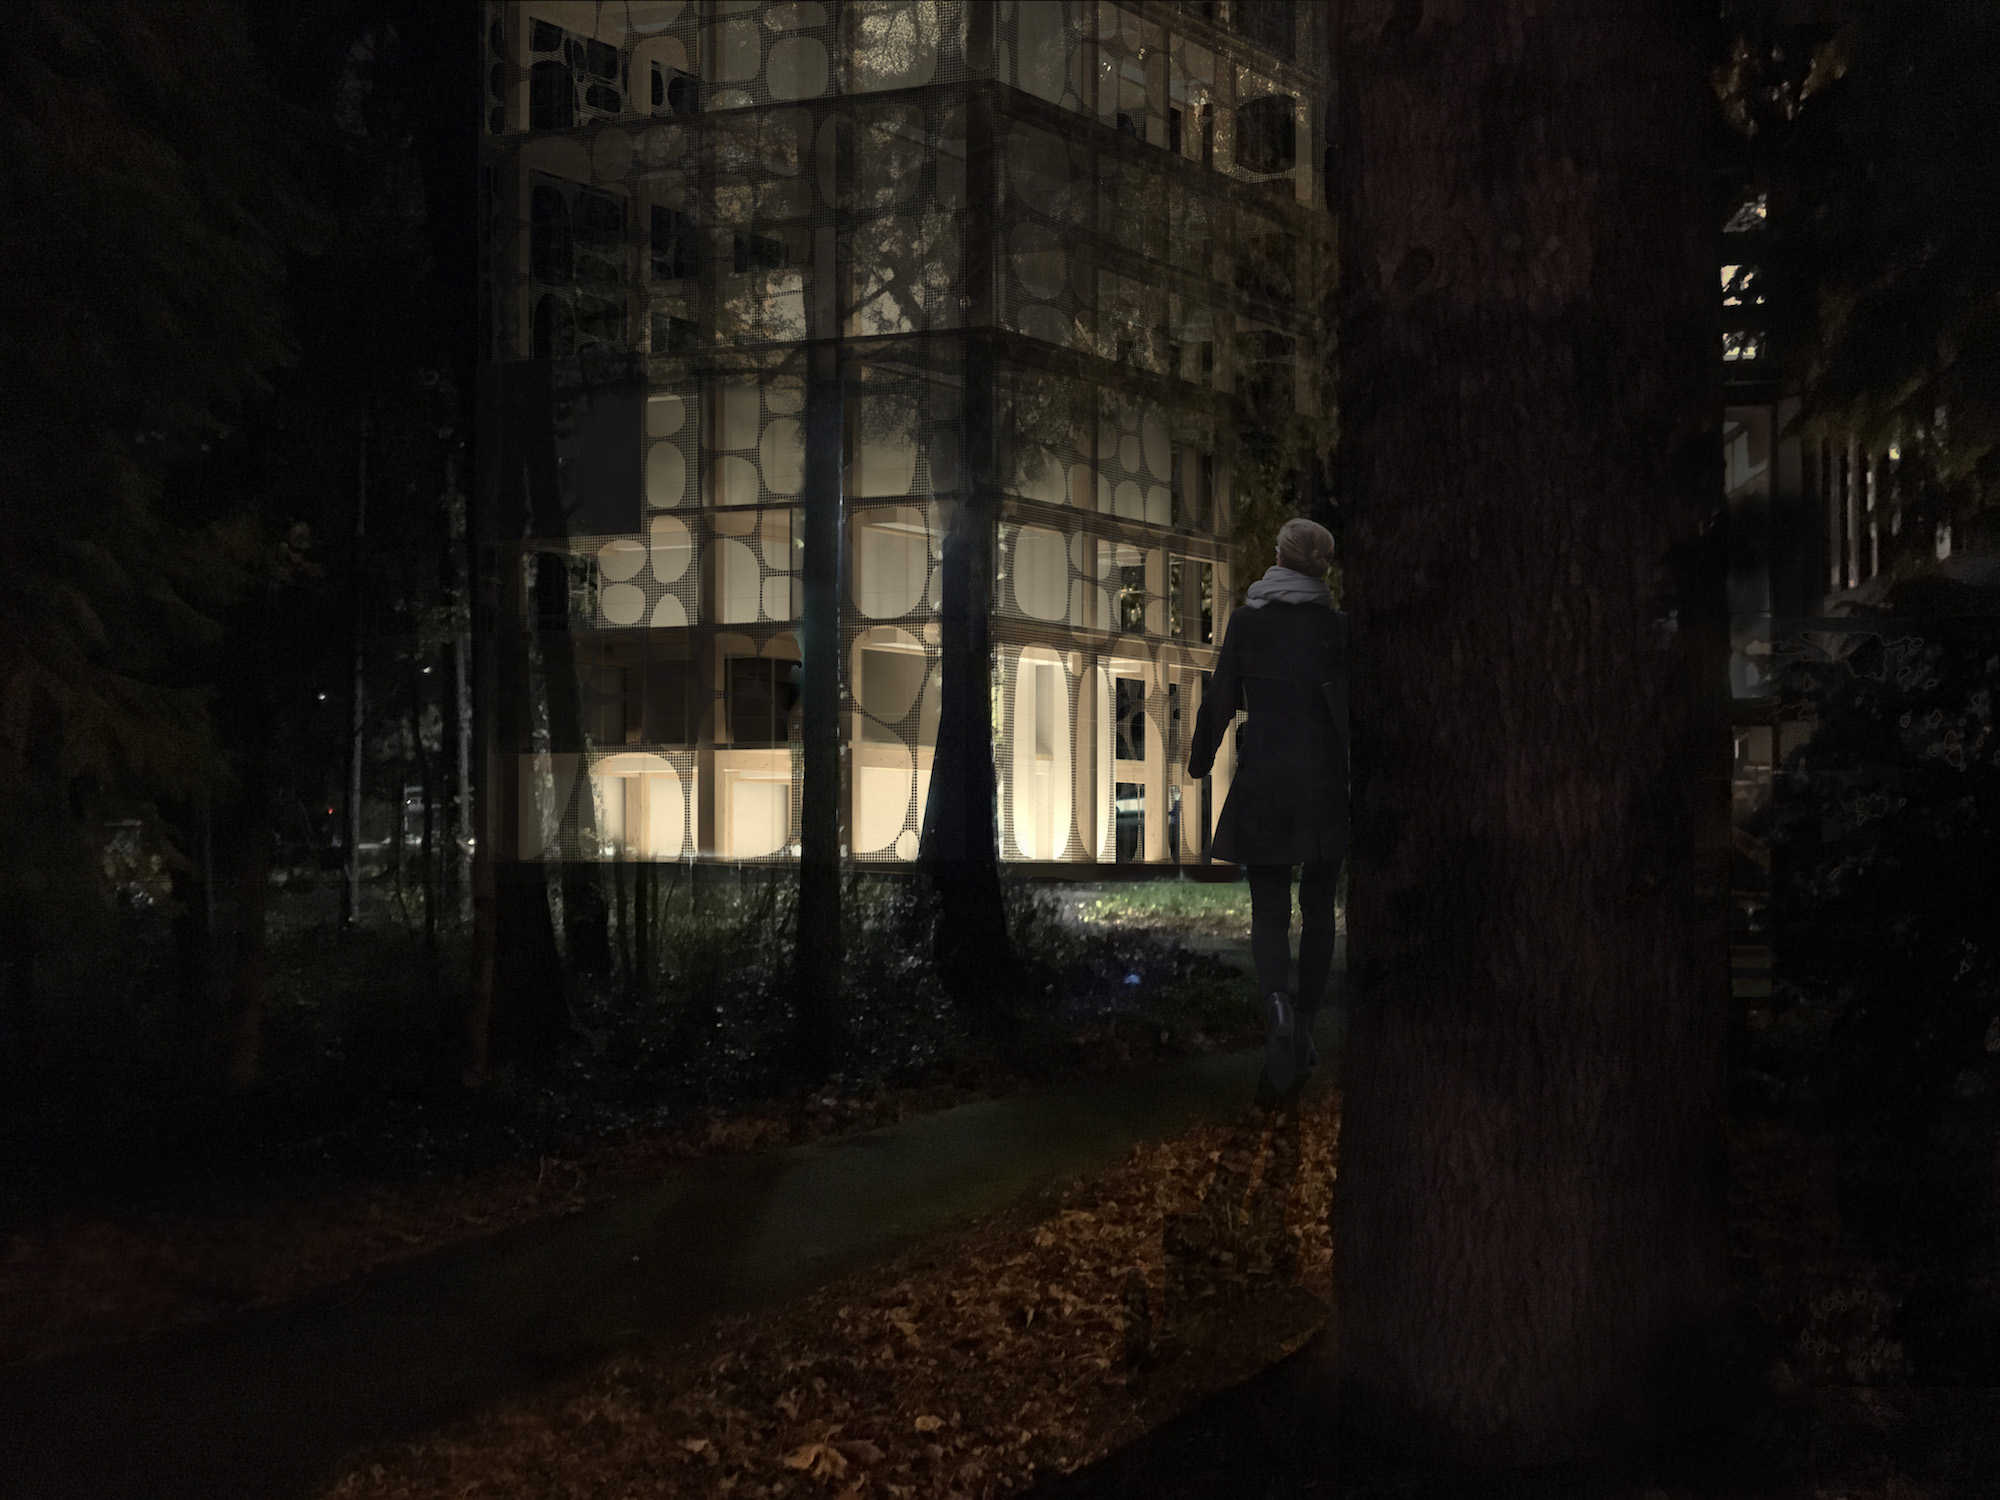 A rendering of the UW Center for Wood Innovation at night (Rendering by Madeleine Black)